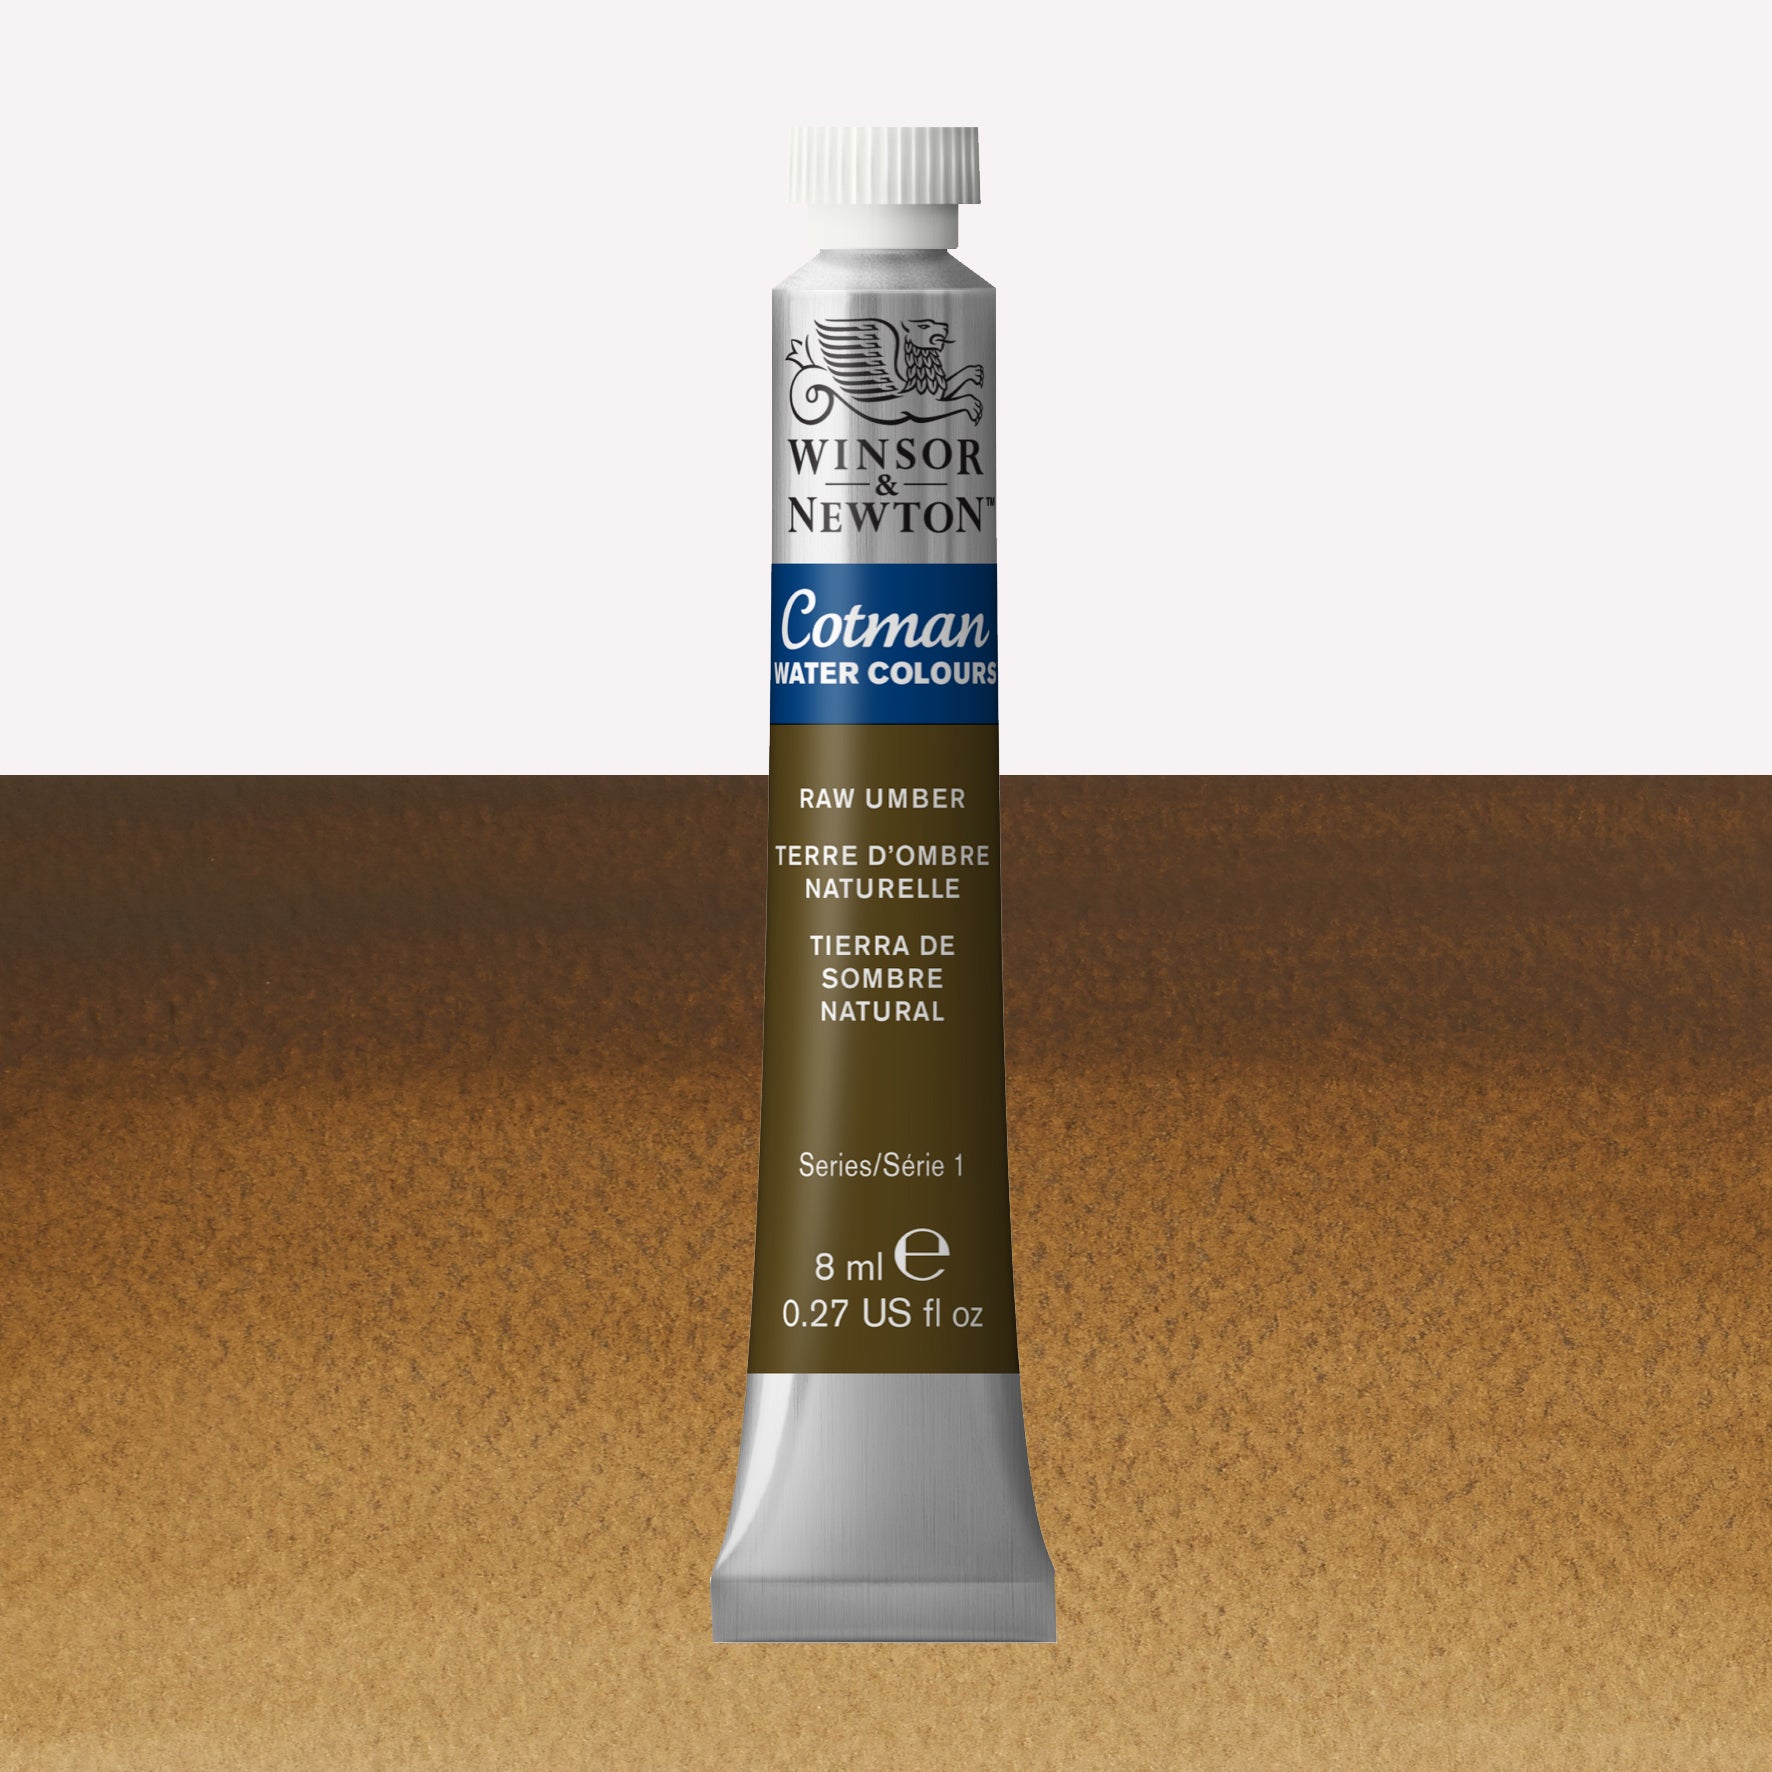 Winsor & Newton Cotman watercolour paint packaged in 8ml silver tube with a white lid in the shade Raw Umber over a highly pigmented colour swatch.